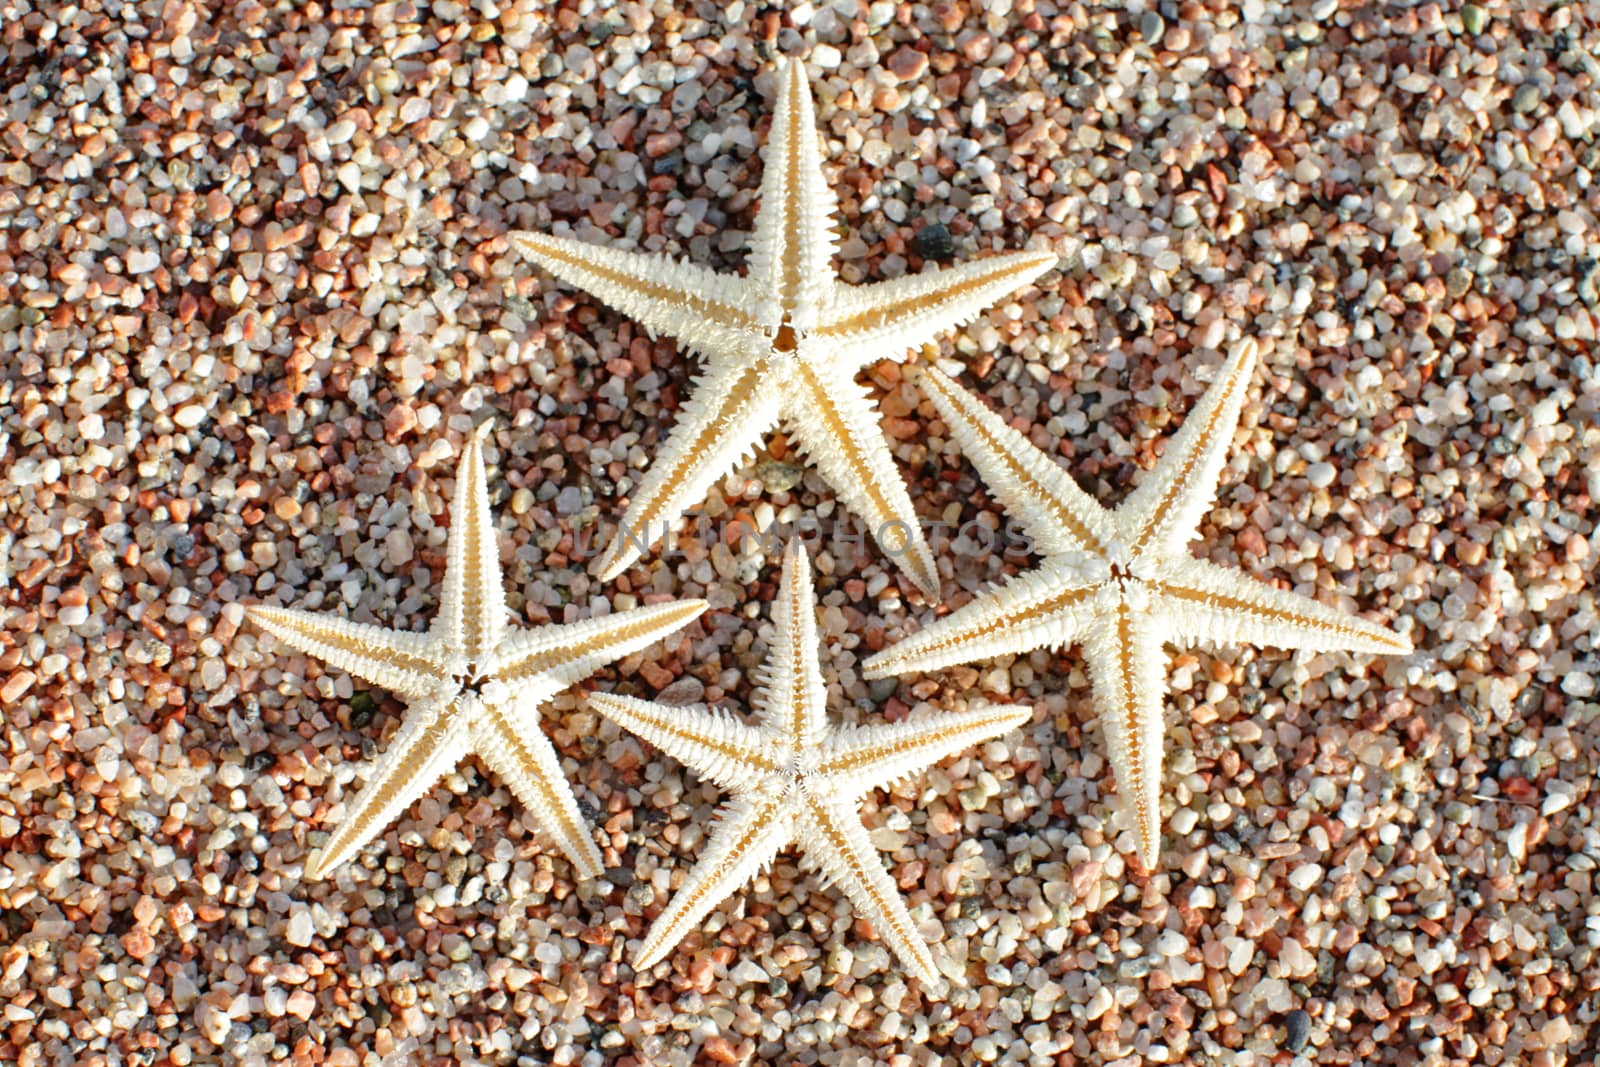 Starfish on the beach. Sandy beach with waves. Summer vacation concept. Holidays by the sea by selinsmo